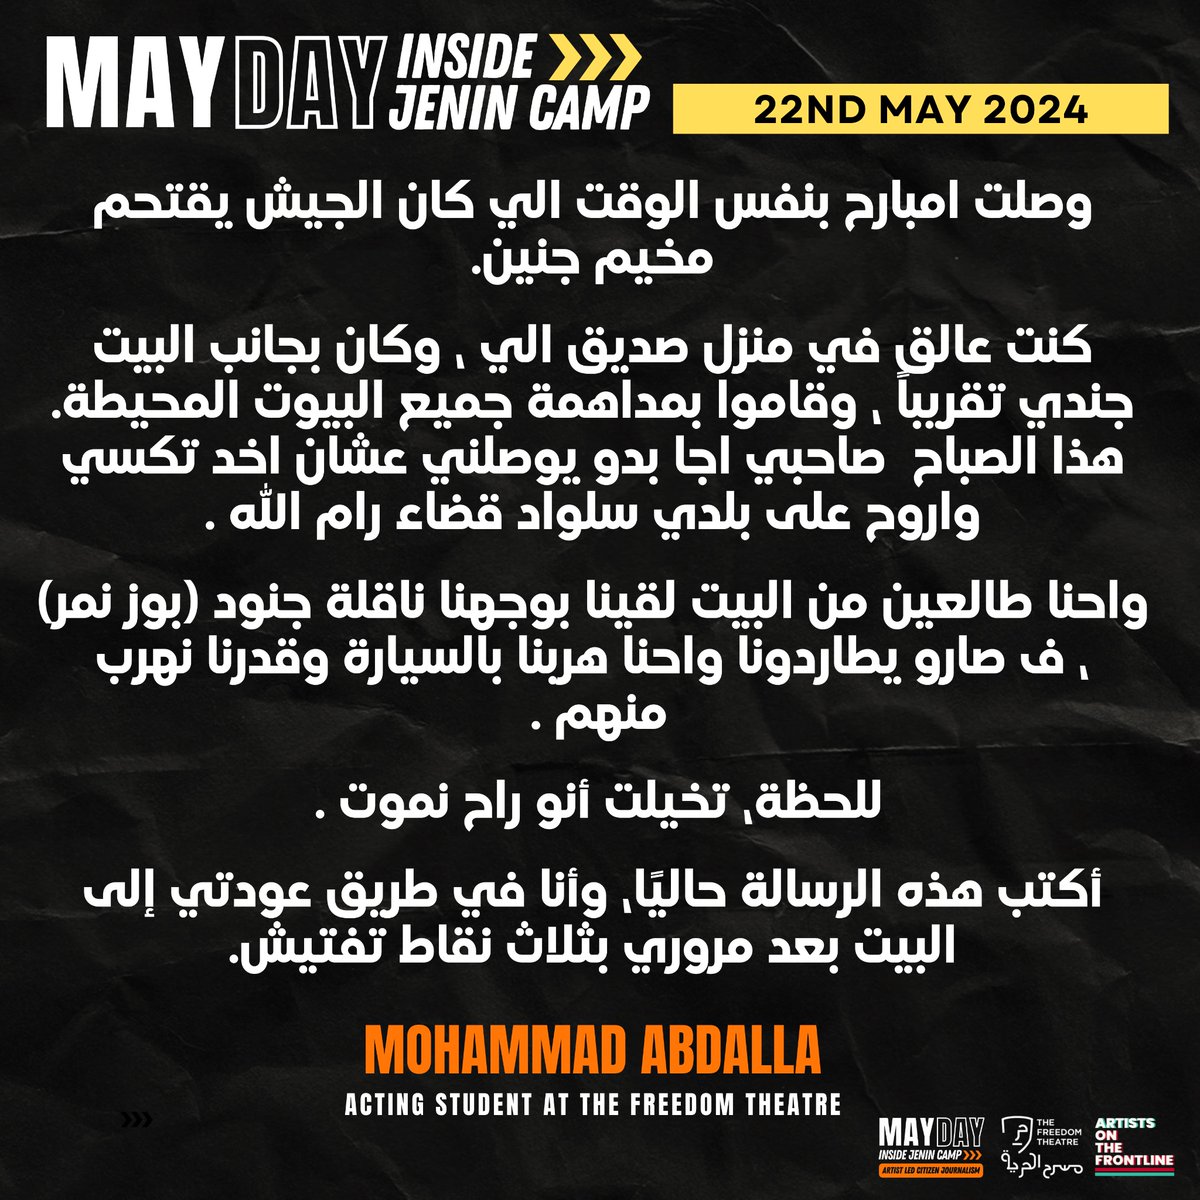 “For a moment I imagined that we would be killed” Update from Mohammed Abdalla acting student at The Freedom Theatre #Mayday Created by @freedom_theatre & @artistfrontline ALL UPDATES theculturalintifada.com/attacks-2023-2… #Jenin #JeninUnderAttack #westbank #Palestine #Theatre #جنين